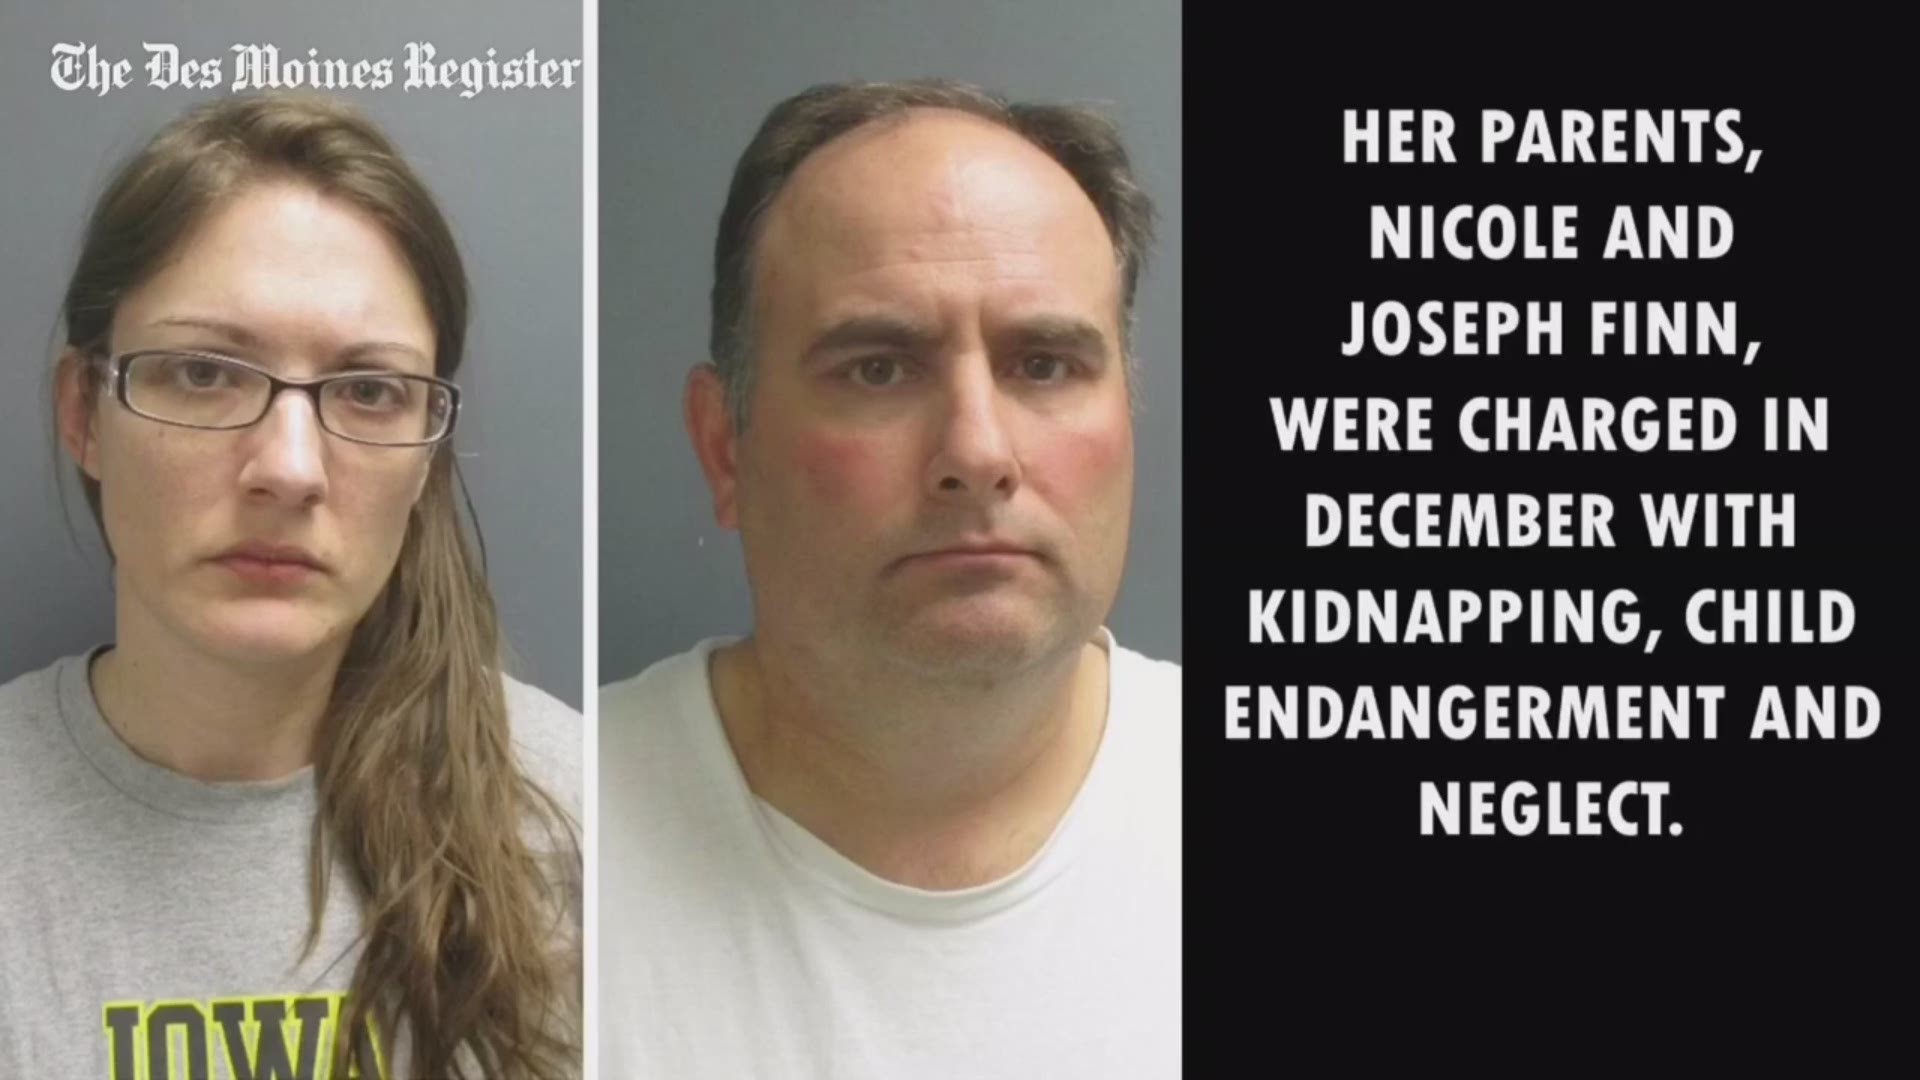 Natalie Finn suffered cardiac arrest in October from emaciation due to denial of critical care. Her parents, Nicole and Joseph Finn, were charged in her death. (The Des Moines Register)